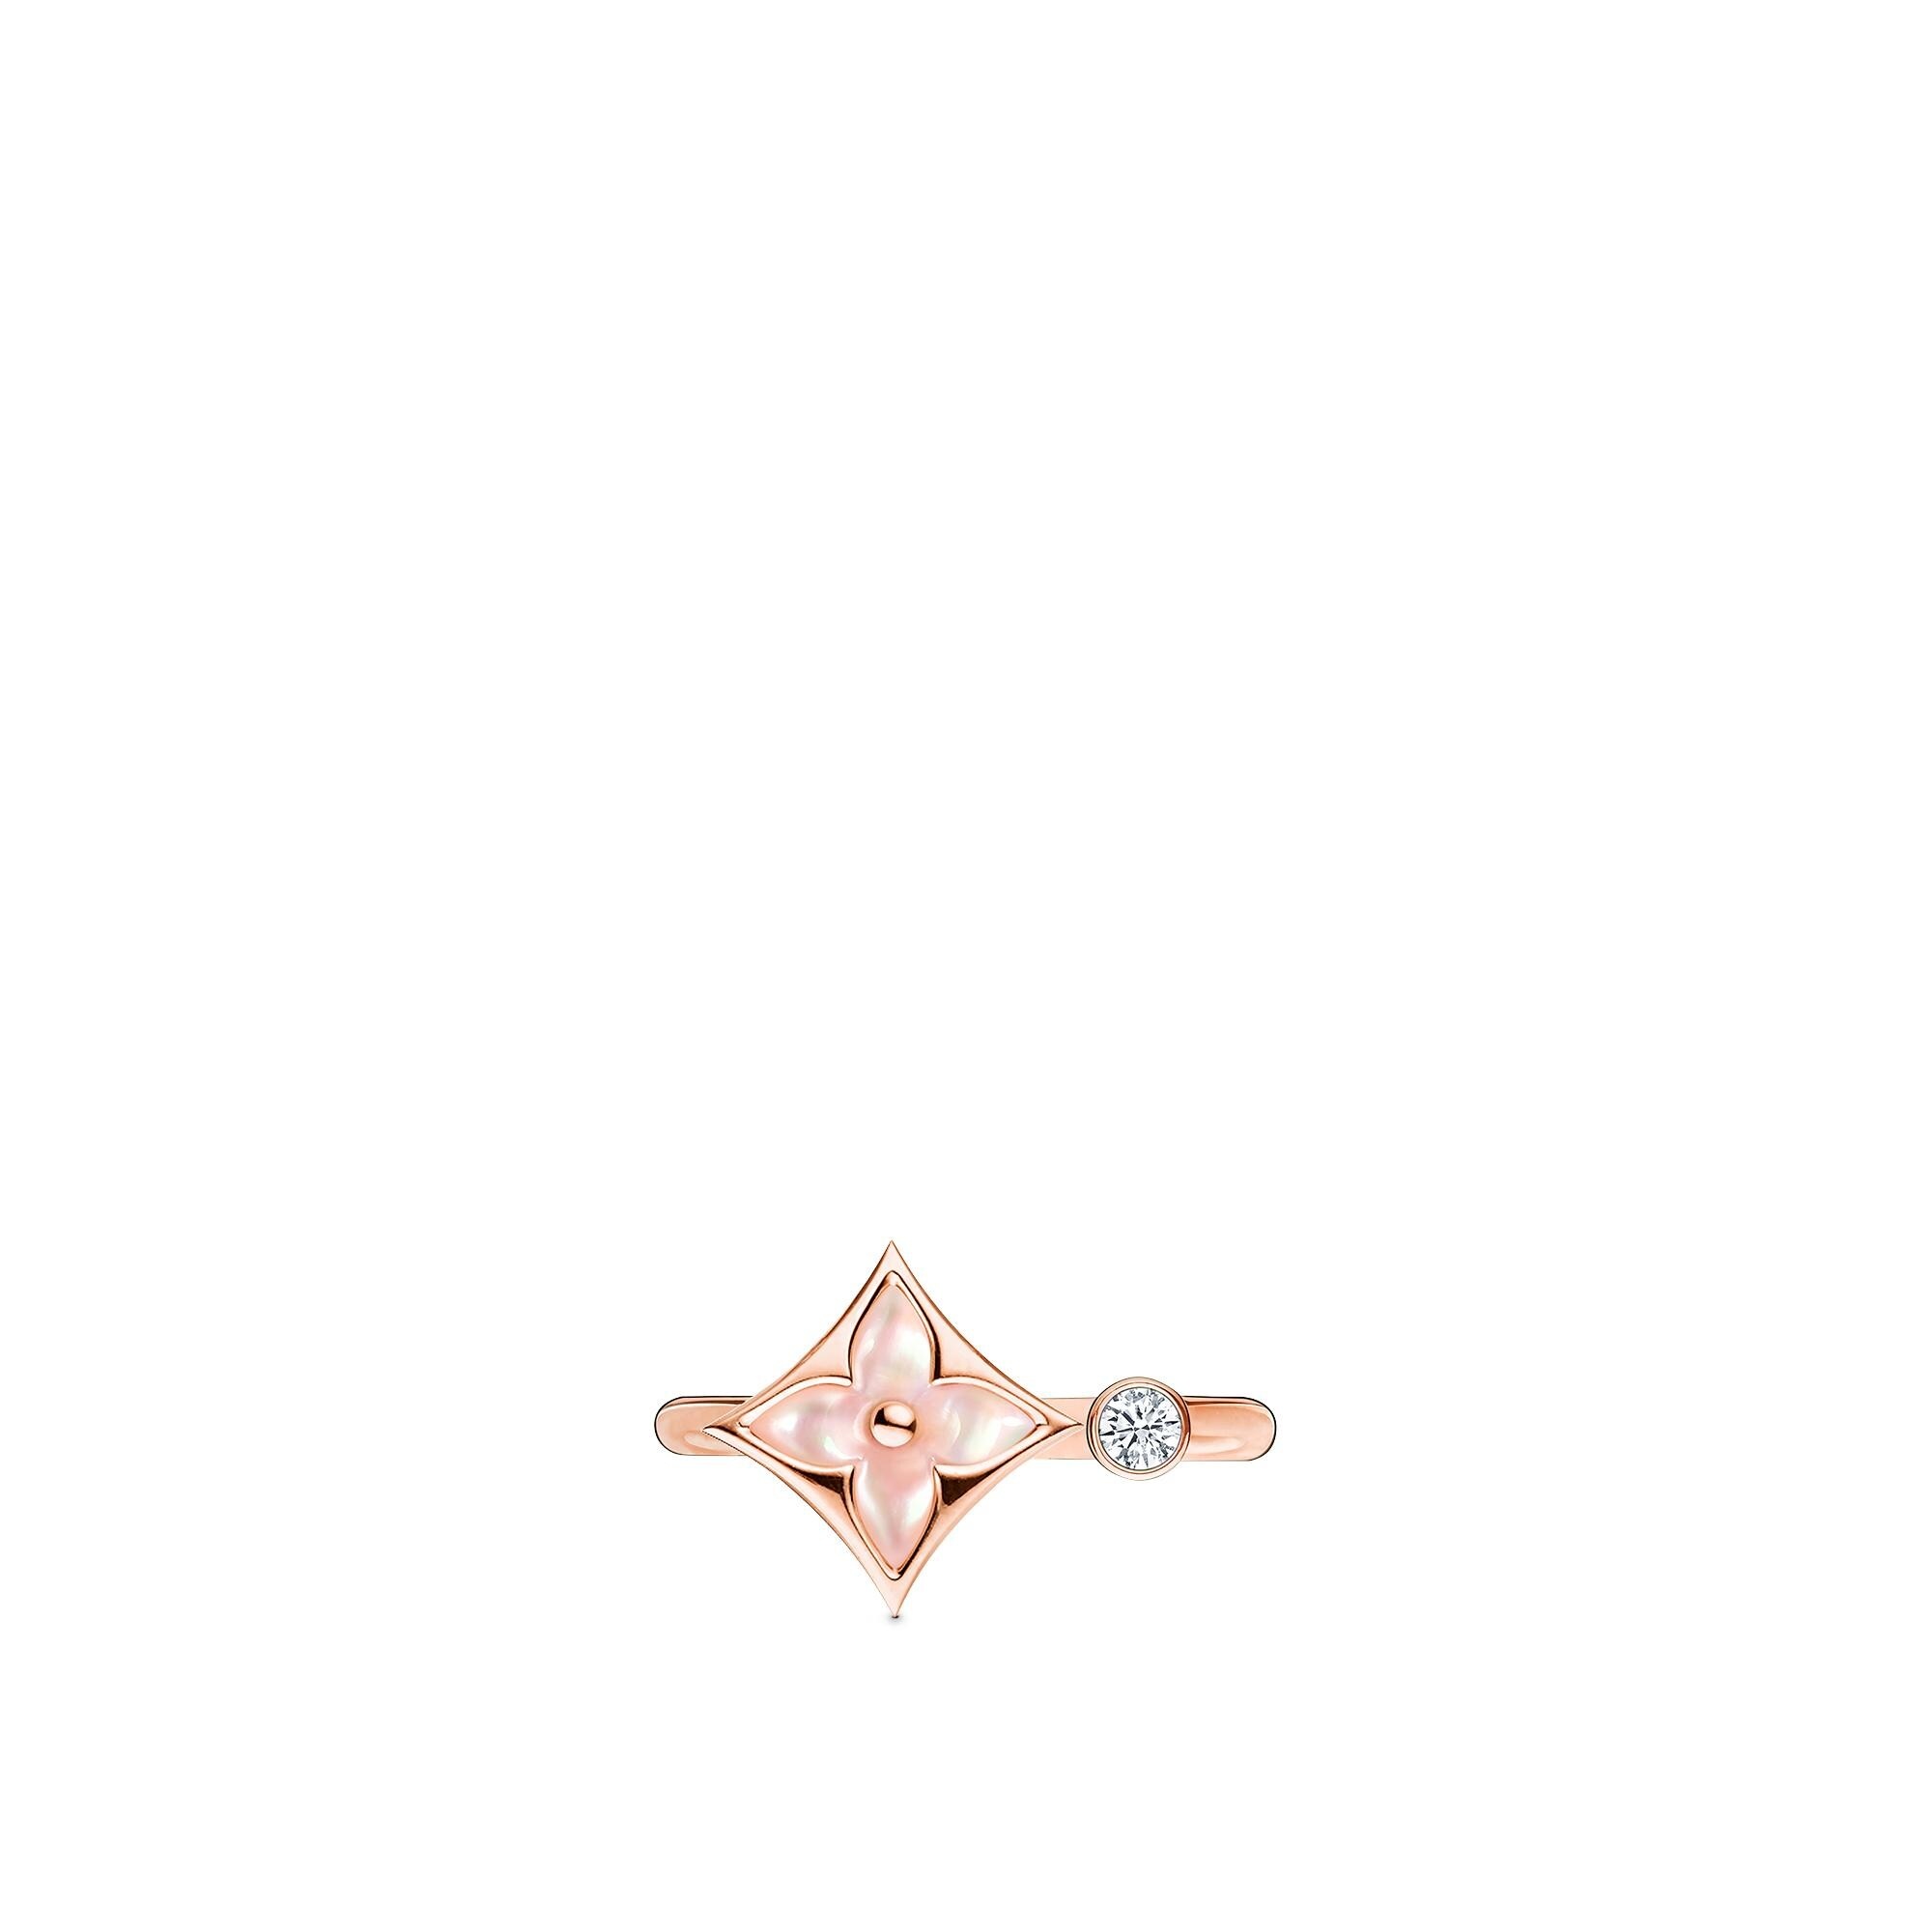 Louis Vuitton Idylle Blossom Ring, 3 Golds and Diamonds Gold. Size 47